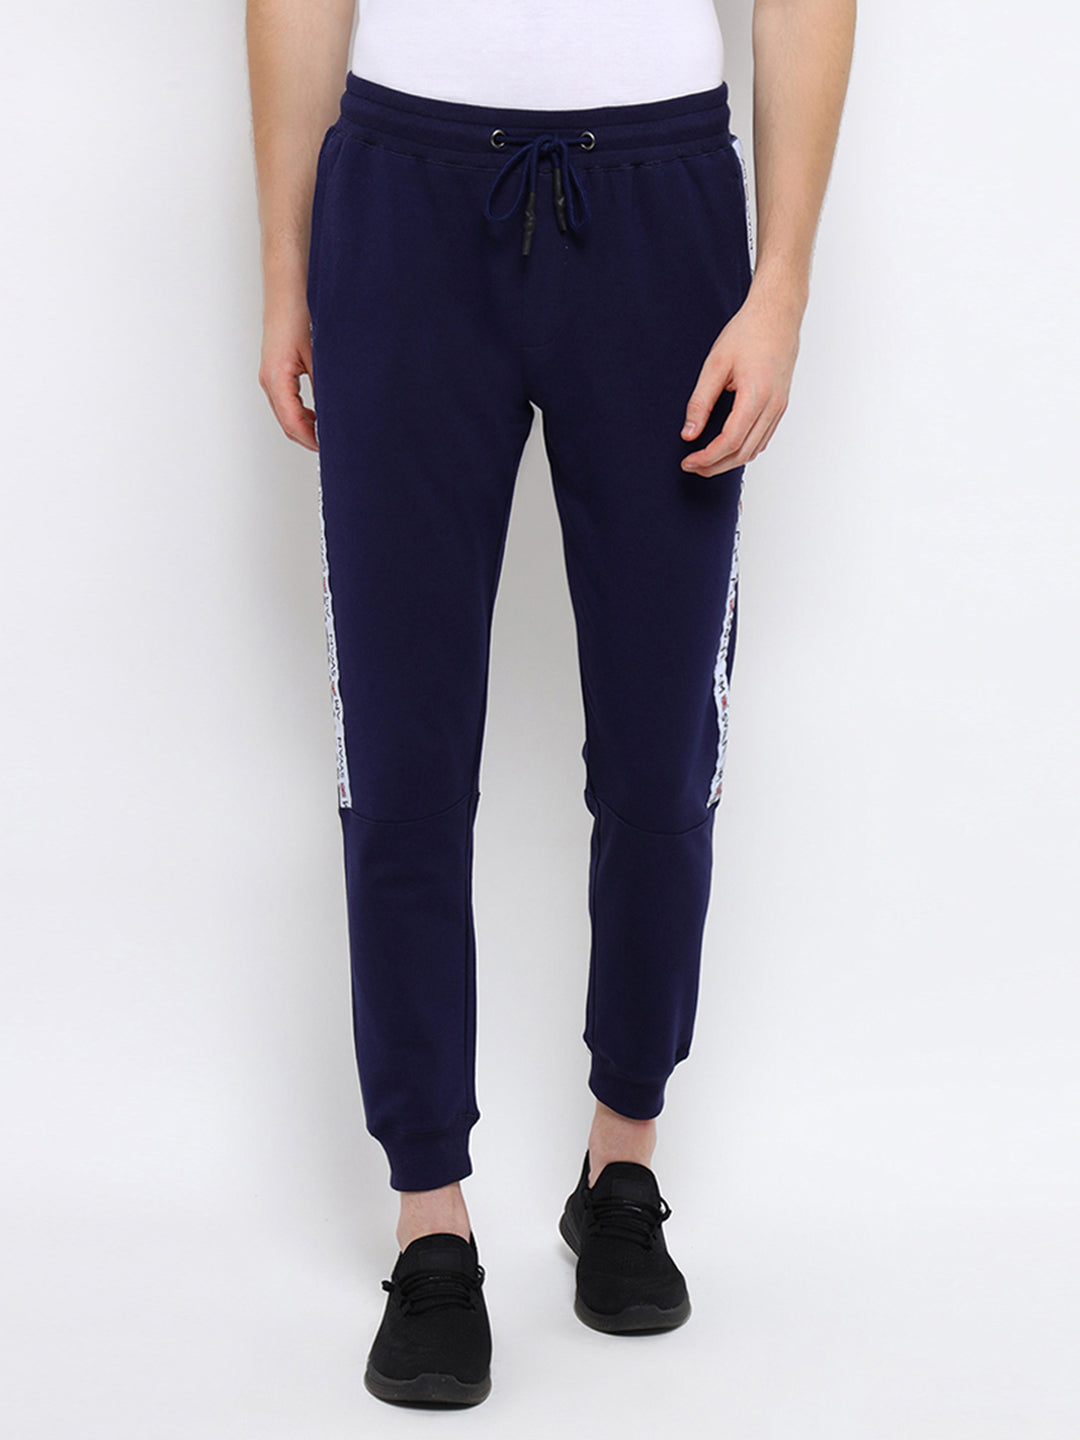 MENS COTTON RICH LYCRA TRACK PANT WITH SIDE PRINTED TAPE